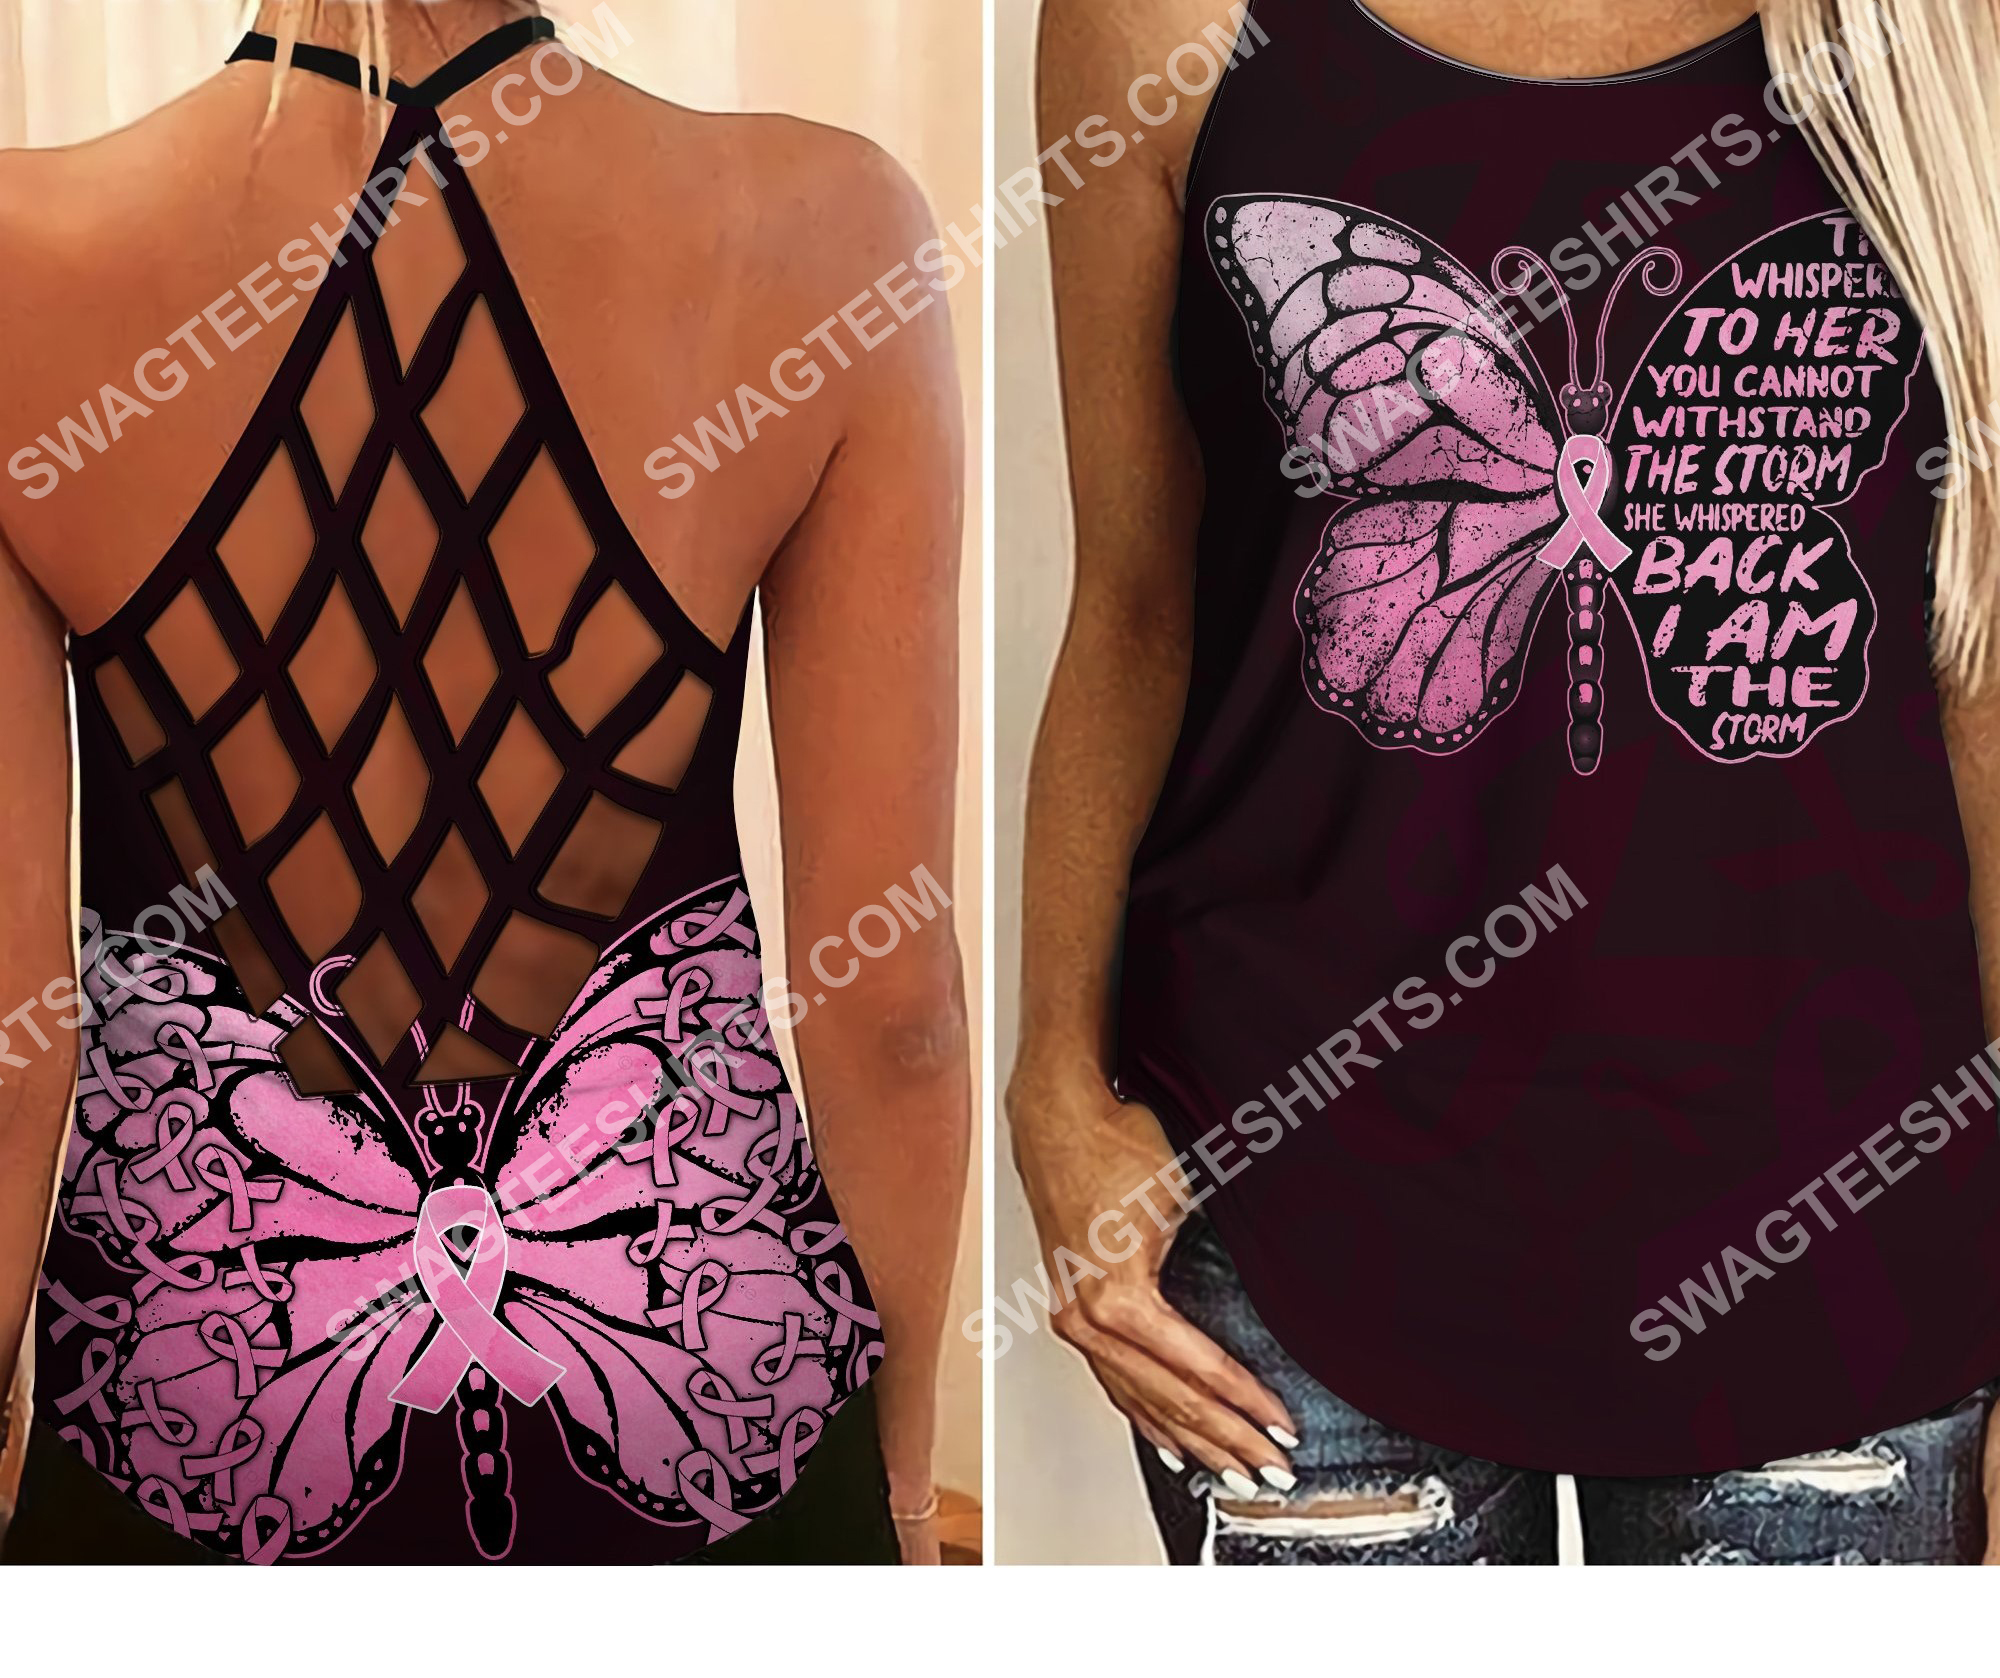 they whispered to her you cannot withstand the storm breast cancer criss-cross tank top 2 - Copy (2)